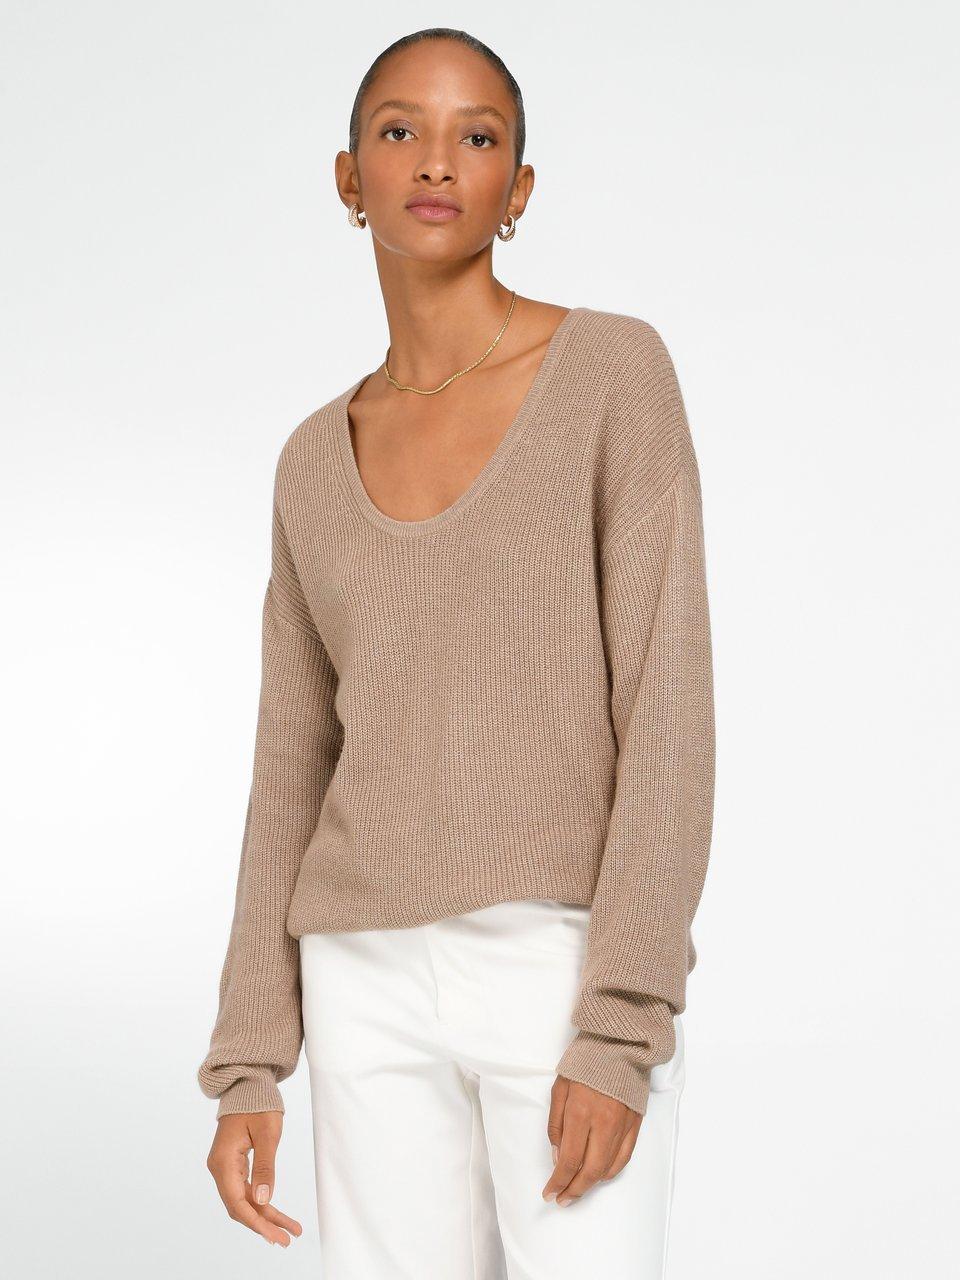 include - Le pull manches longues